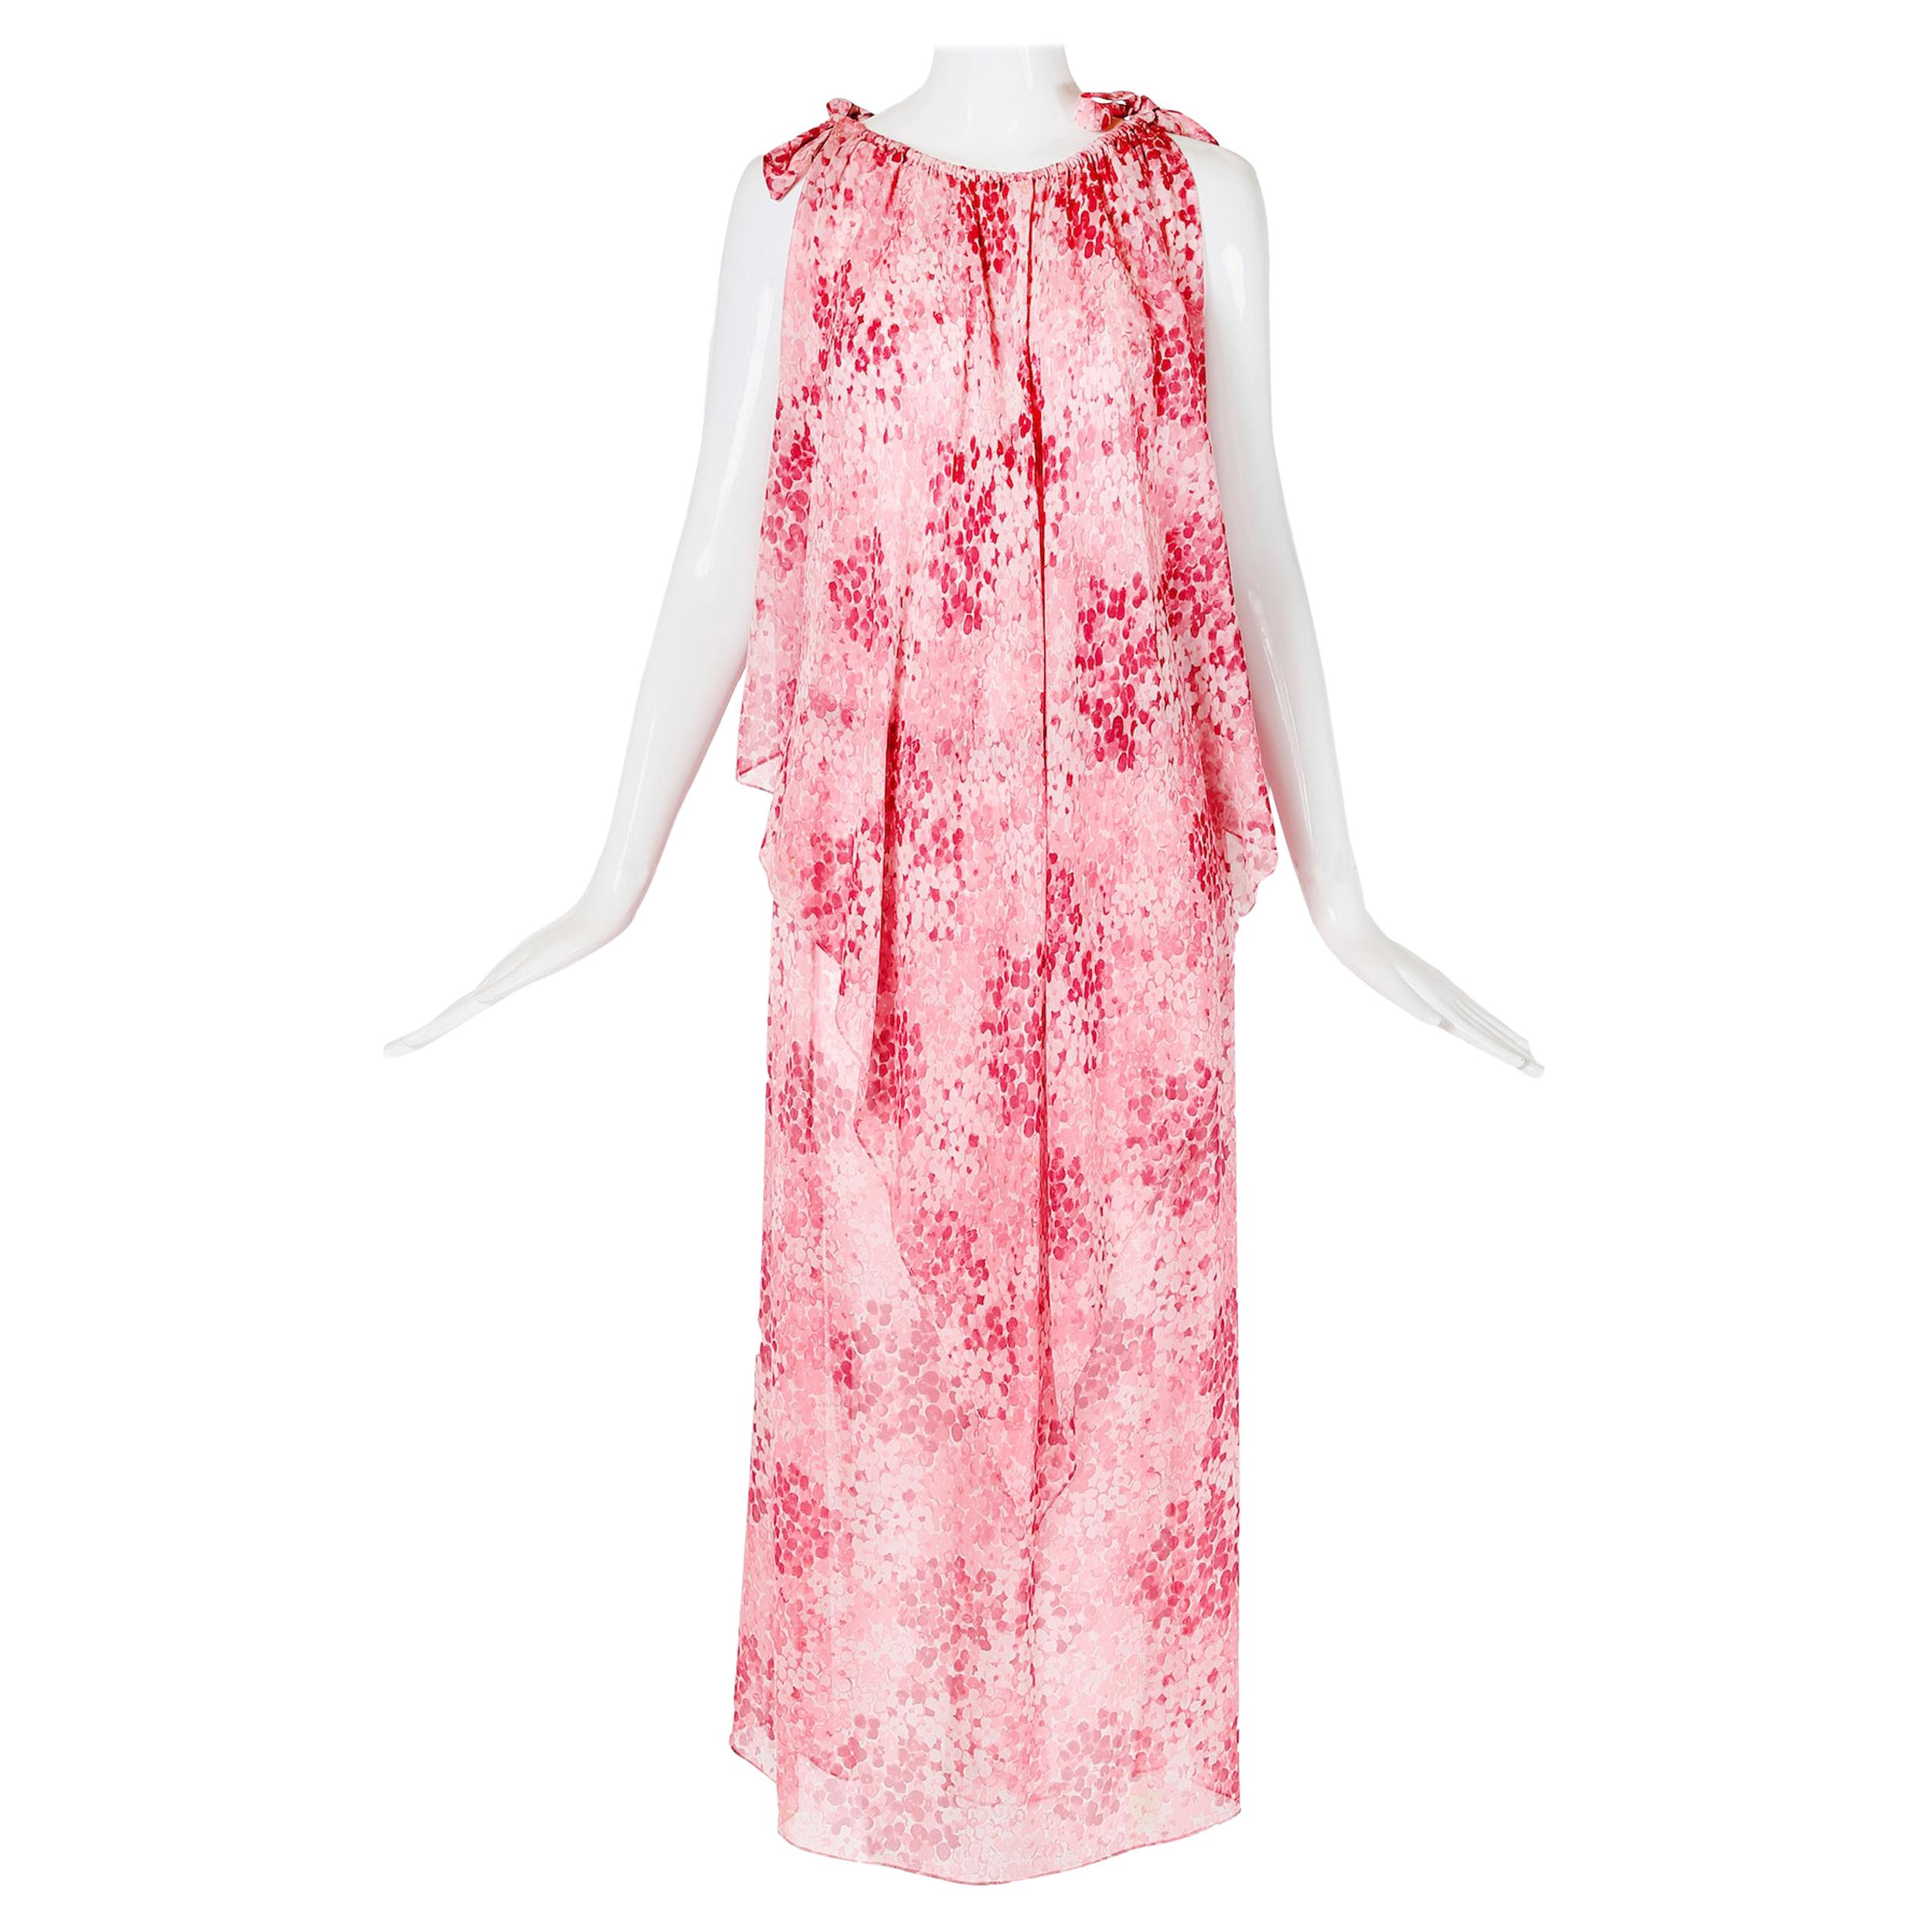 Yves Saint Laurent Floral Print Chiffon Layered Sleeveless Tunic-Style Dress For Sale